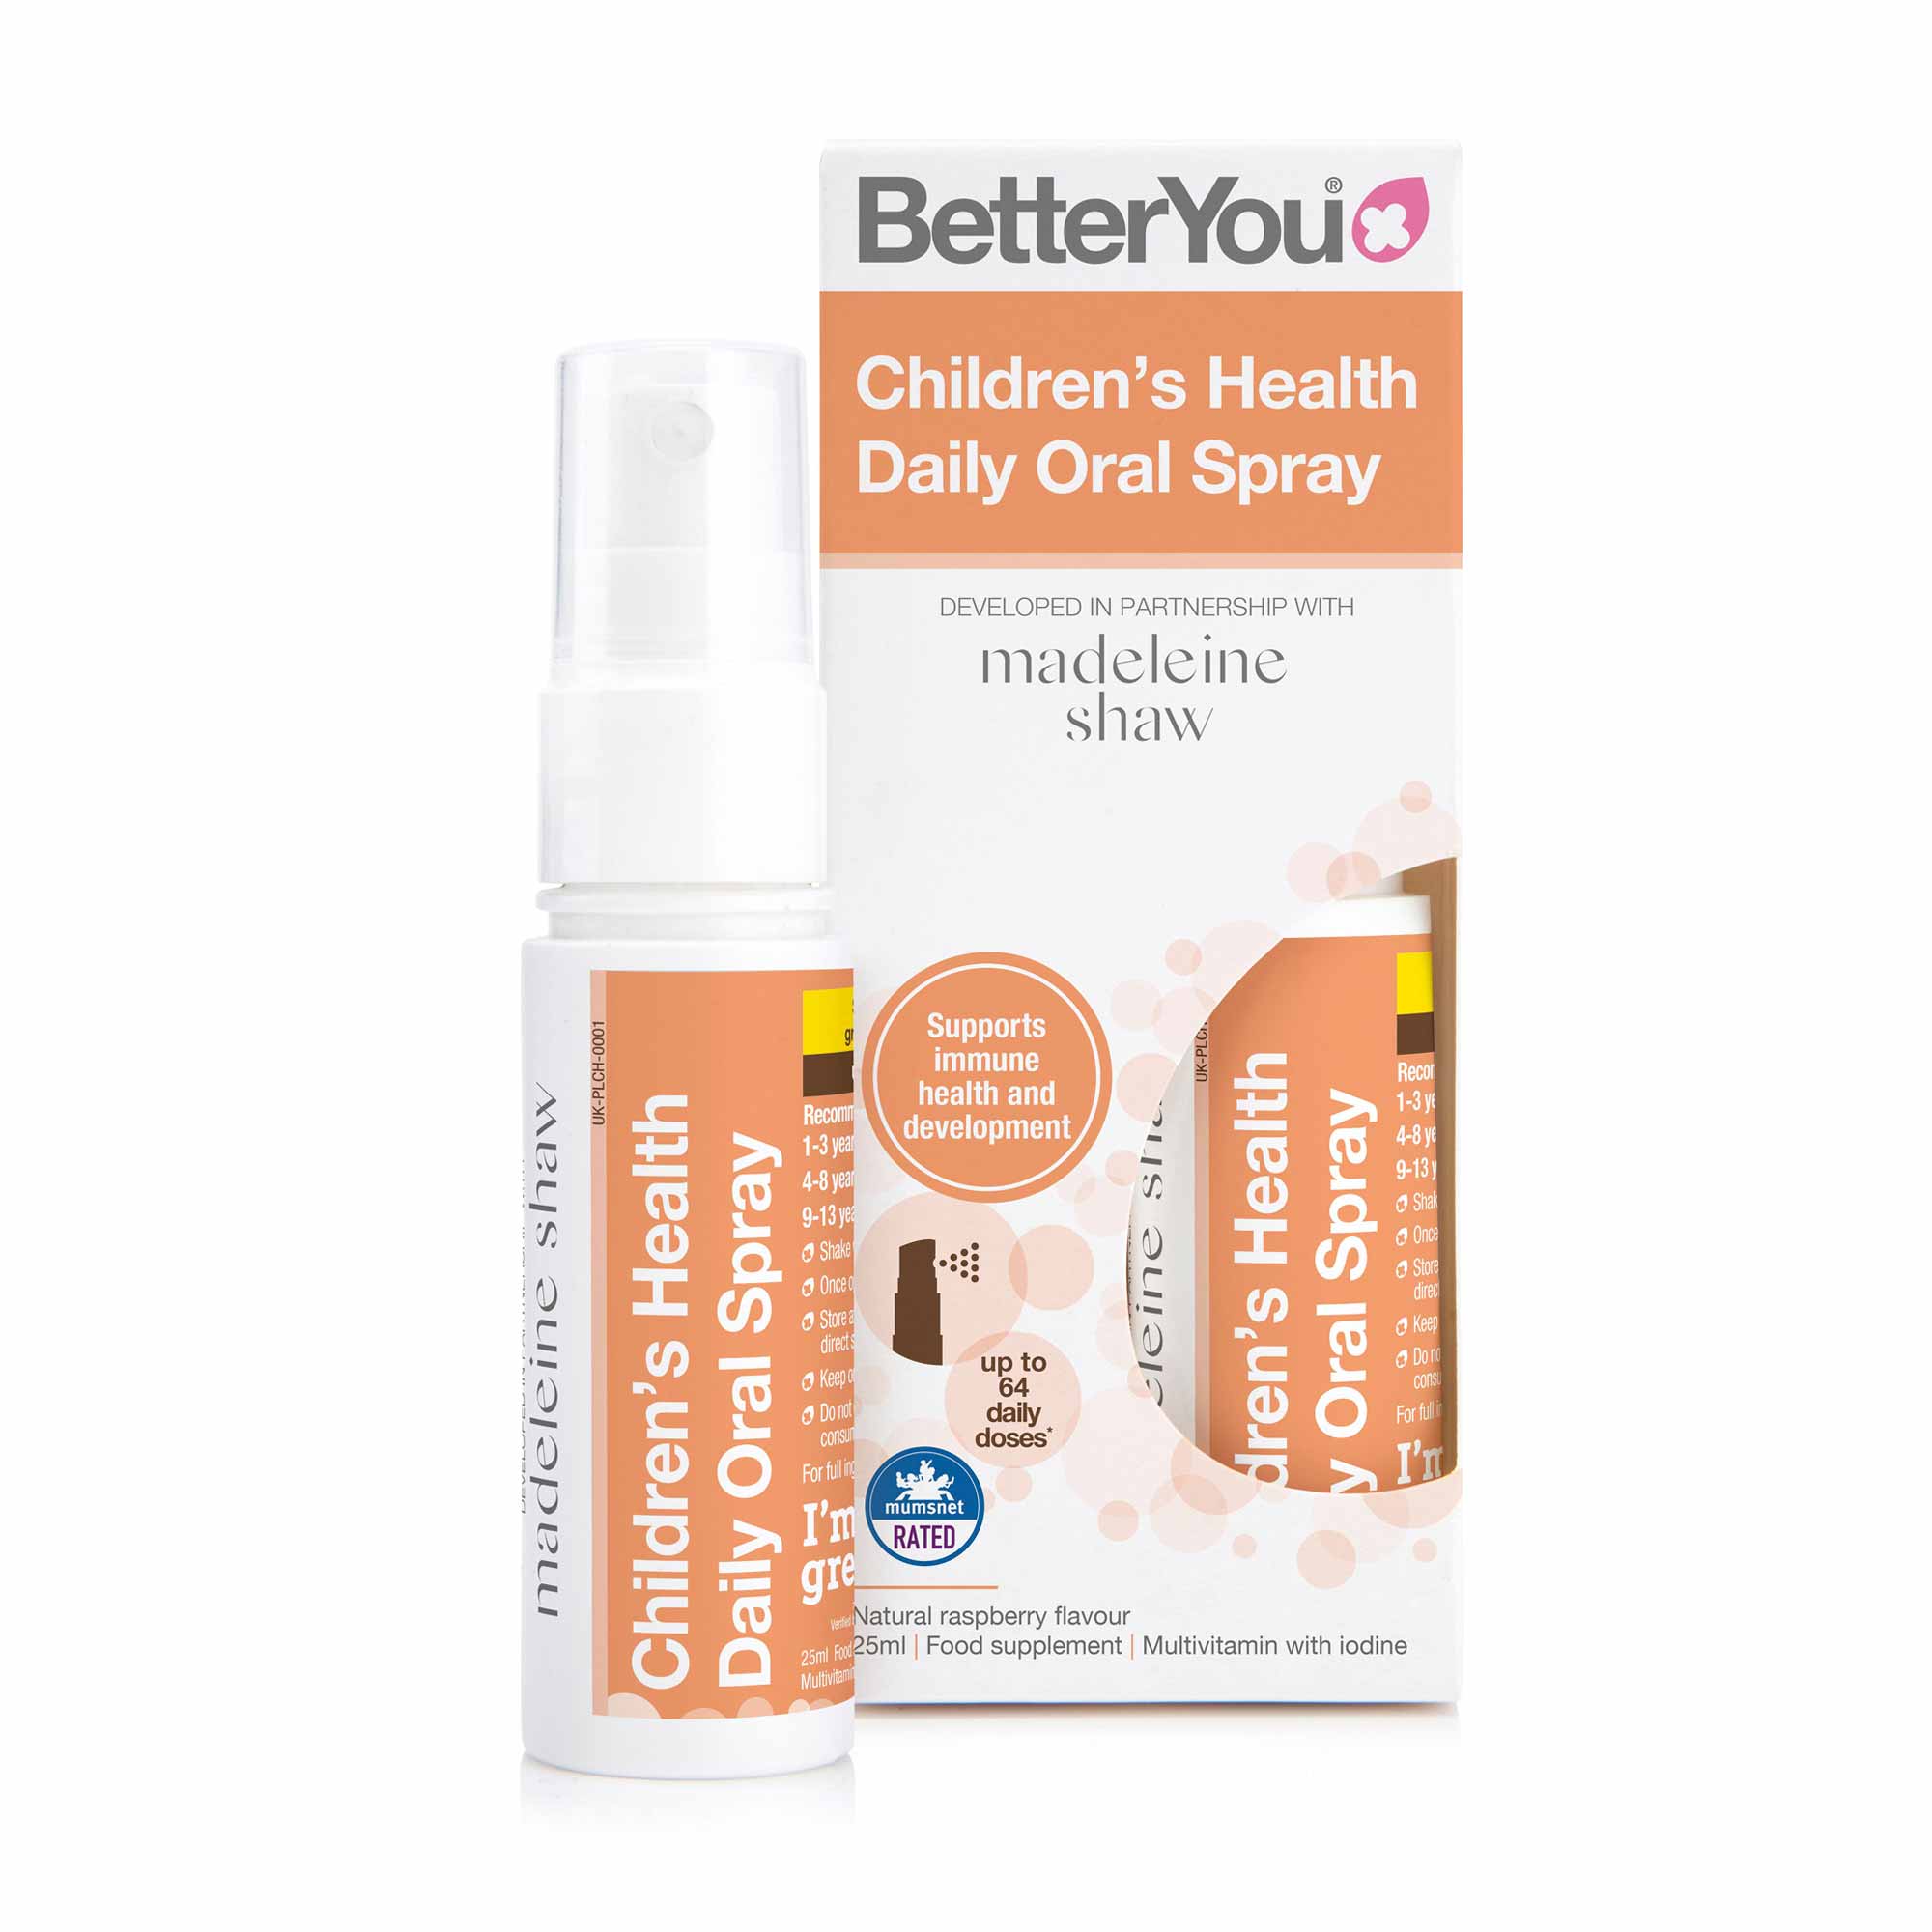 Better You Children's Health Oral Spray, Immune Support, Fatigue, Leahys Pharmacy